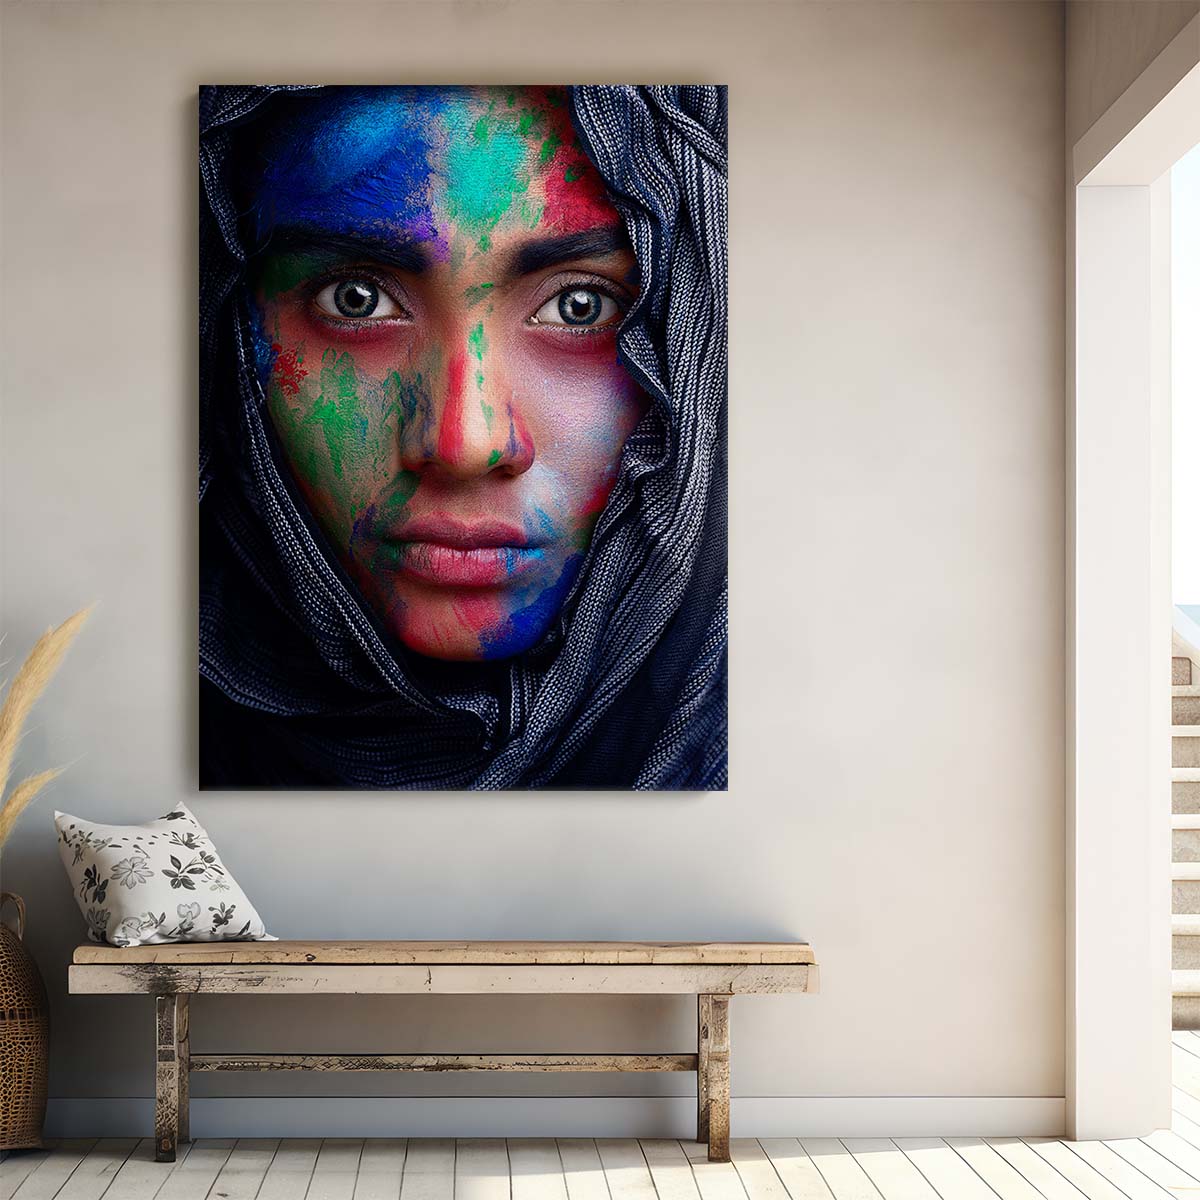 Colorful Painted Woman Portrait Intense Face & Veiled Expression Photography by Luxuriance Designs, made in USA